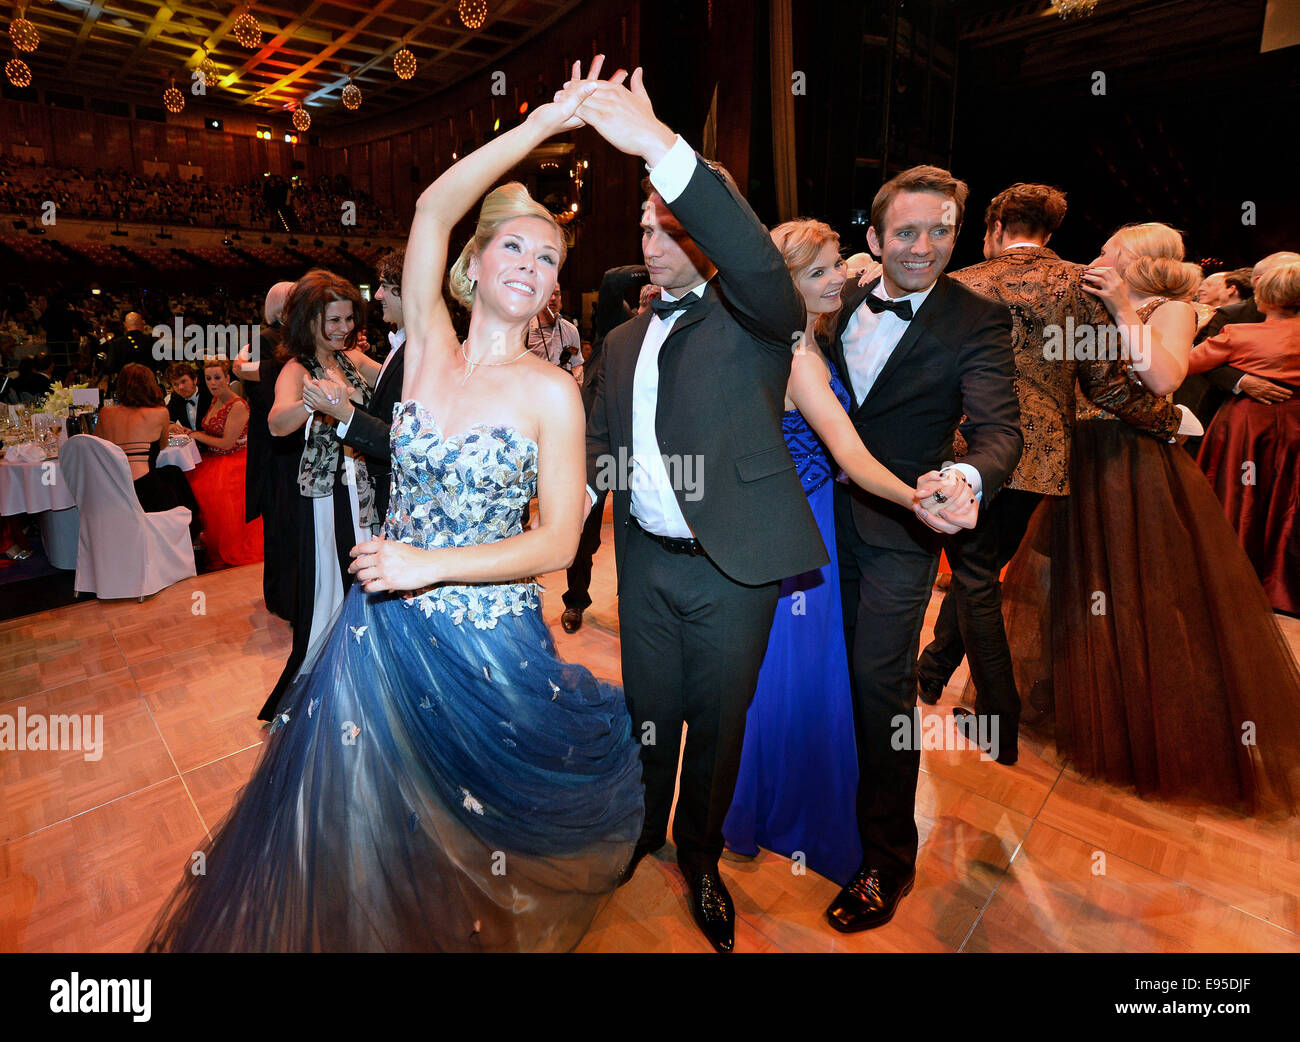 Leipzig, Germany. 18th Oct, 2014. The former figure-skater Tanja Szewczenko and her partner Norman Jeschke dance at the 20th Opera Ball in Leipzig, Germany, 18 October 2014. Under the motto 'Good Evening Houston - Let's have a Ball', the ball is expected to draw around 2,000 guests. Photo: Hendrik Schmidt/dpa/Alamy Live News Stock Photo